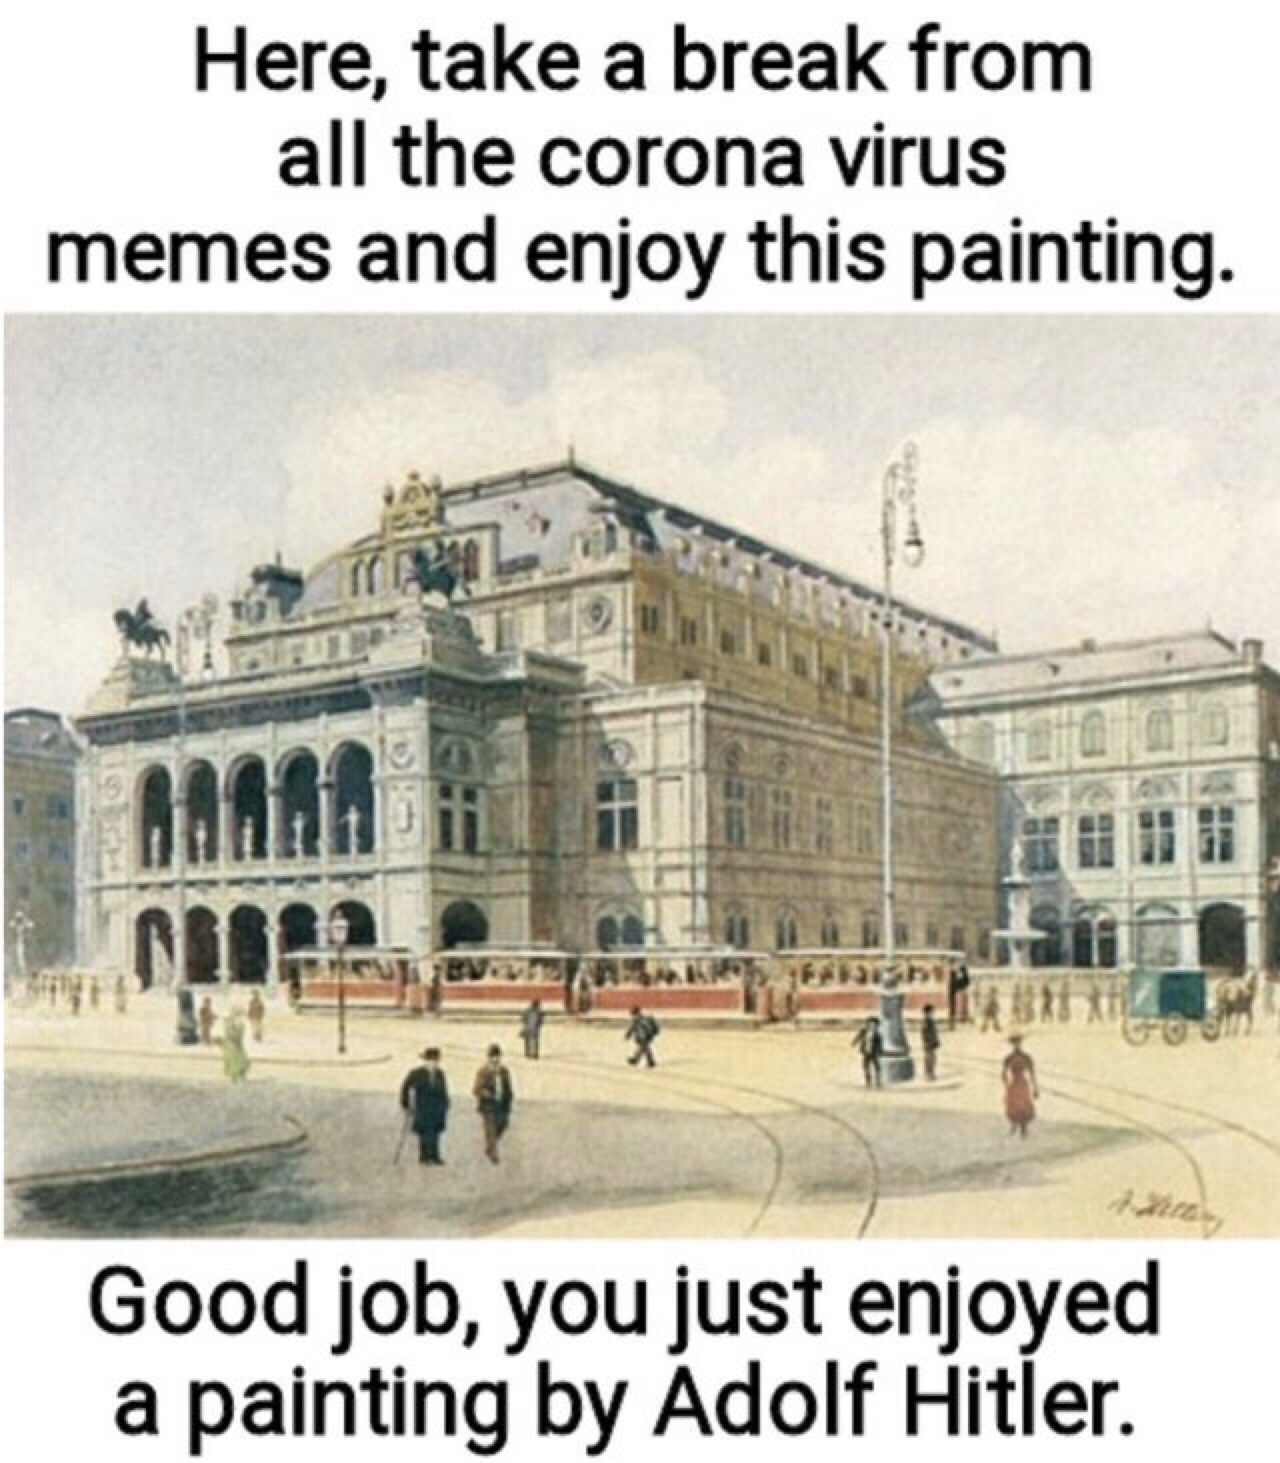 adolf hitler paintings - Here, take a break from all the corona virus memes and enjoy this painting. Good job, you just enjoyed a painting by Adolf Hitler.